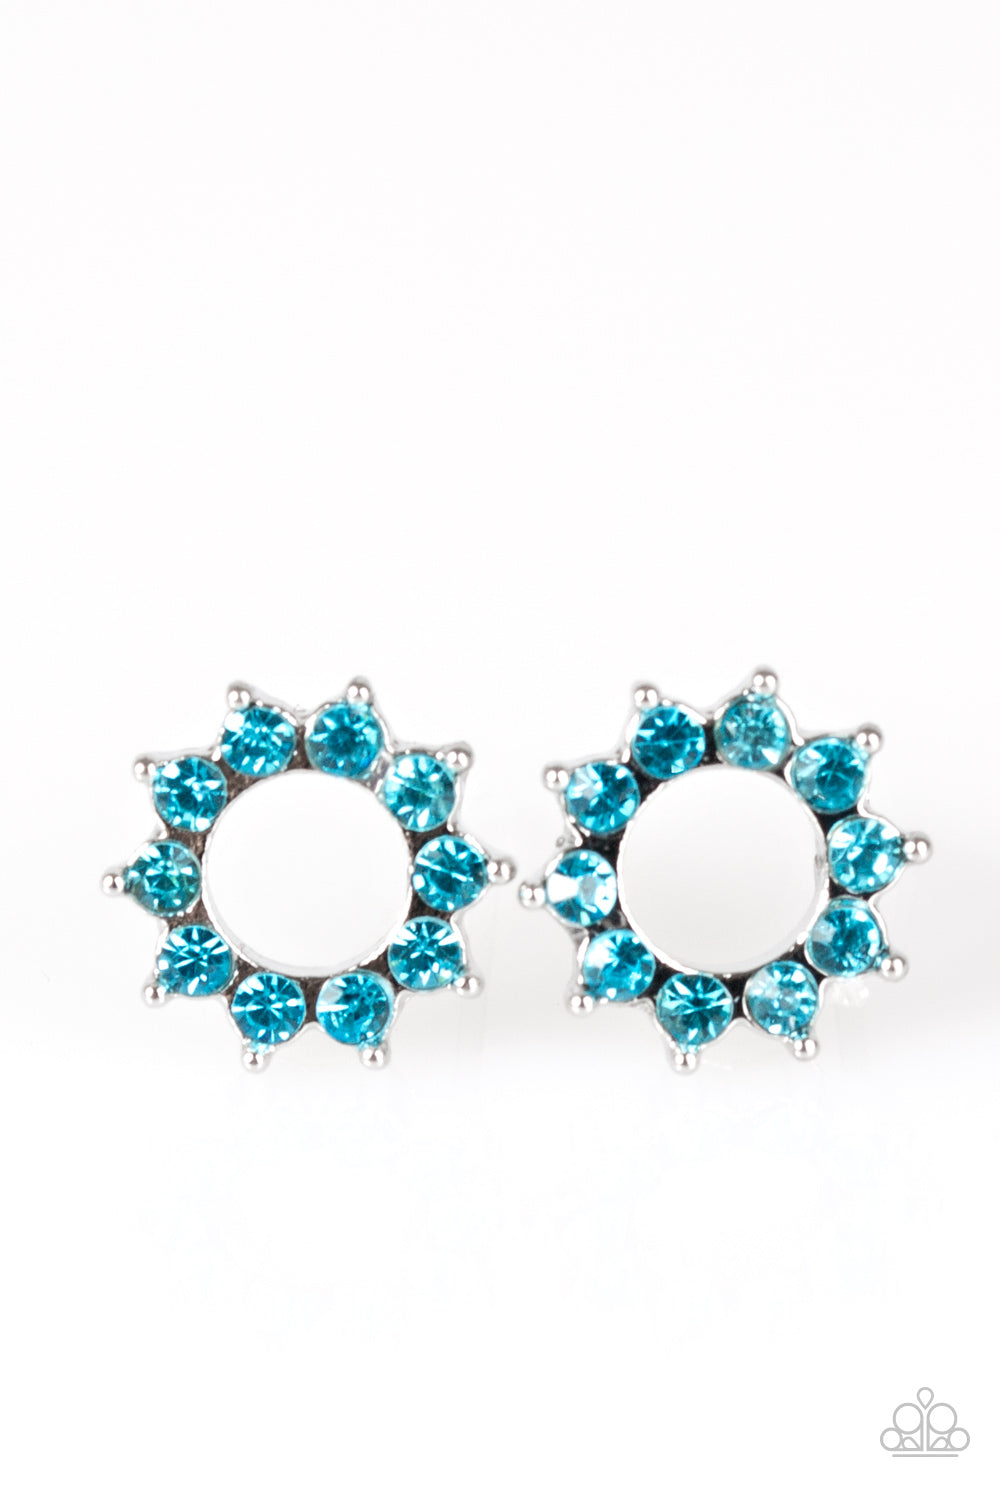 Paparazzi Accessories Richly Resplendent - Blue Post Earrings